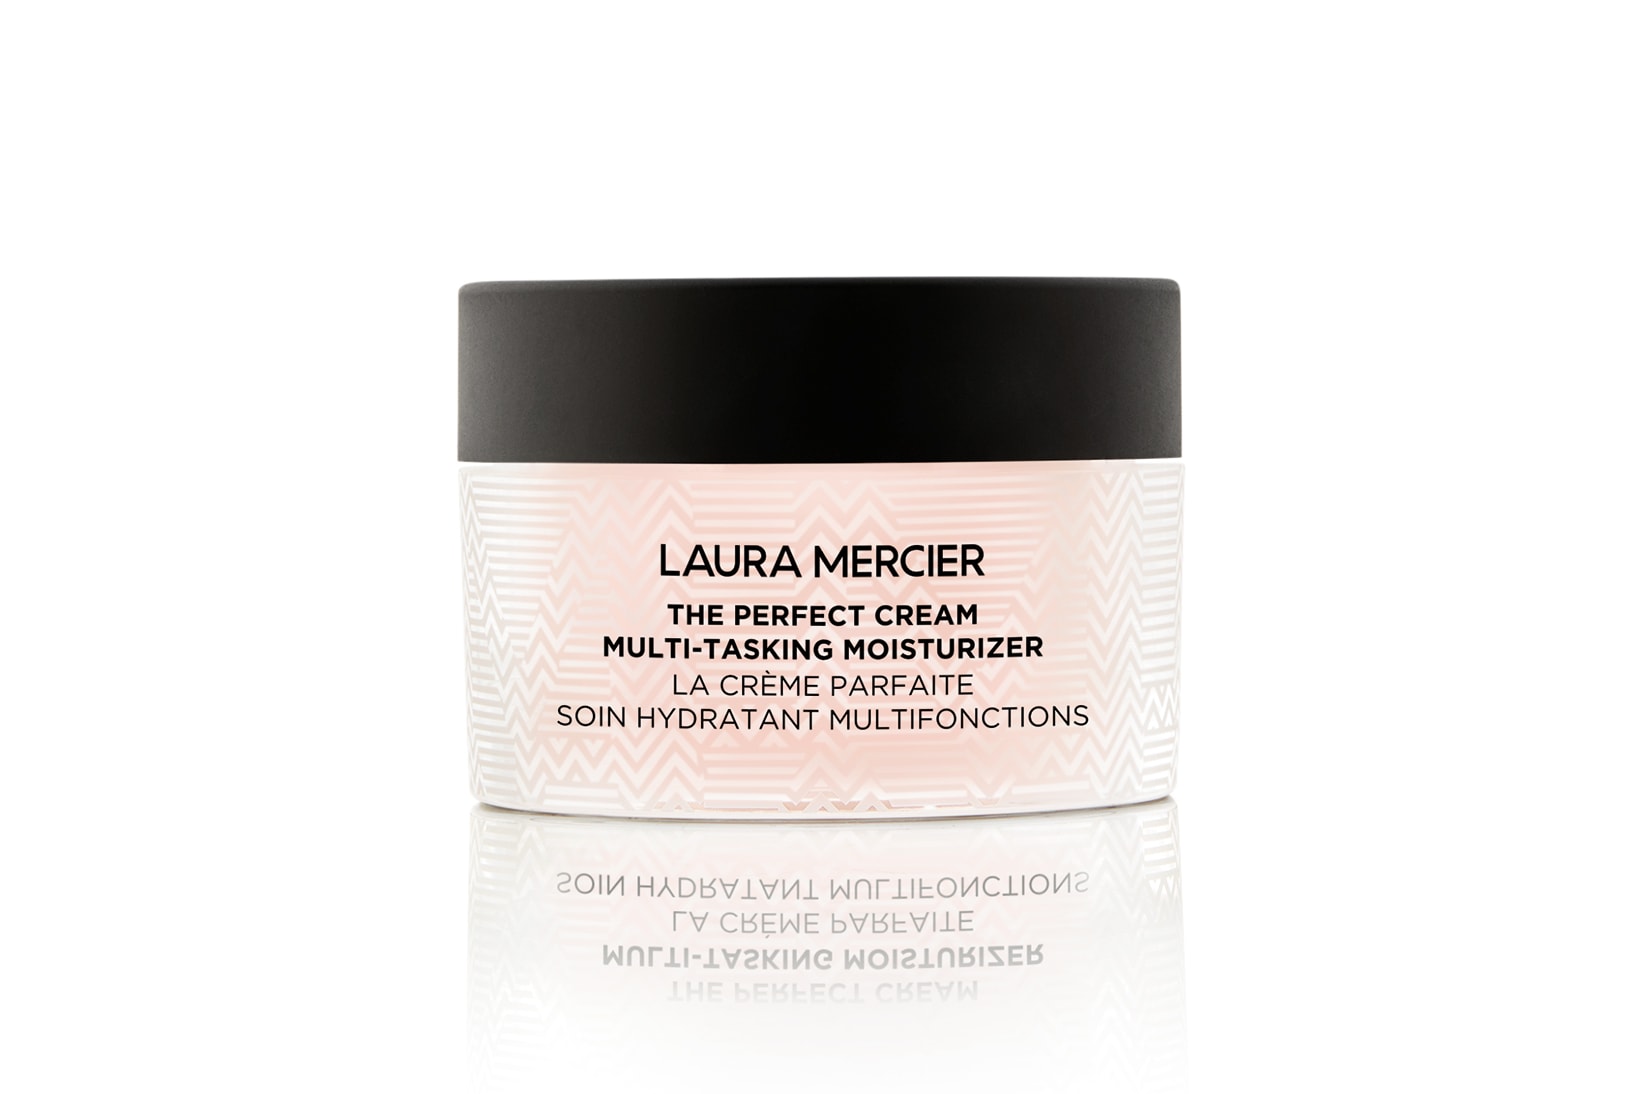 laura mercier skin essentials collection skincare balancing foaming cleanser lip balm soothing eye makeup remover illuminating eye cream